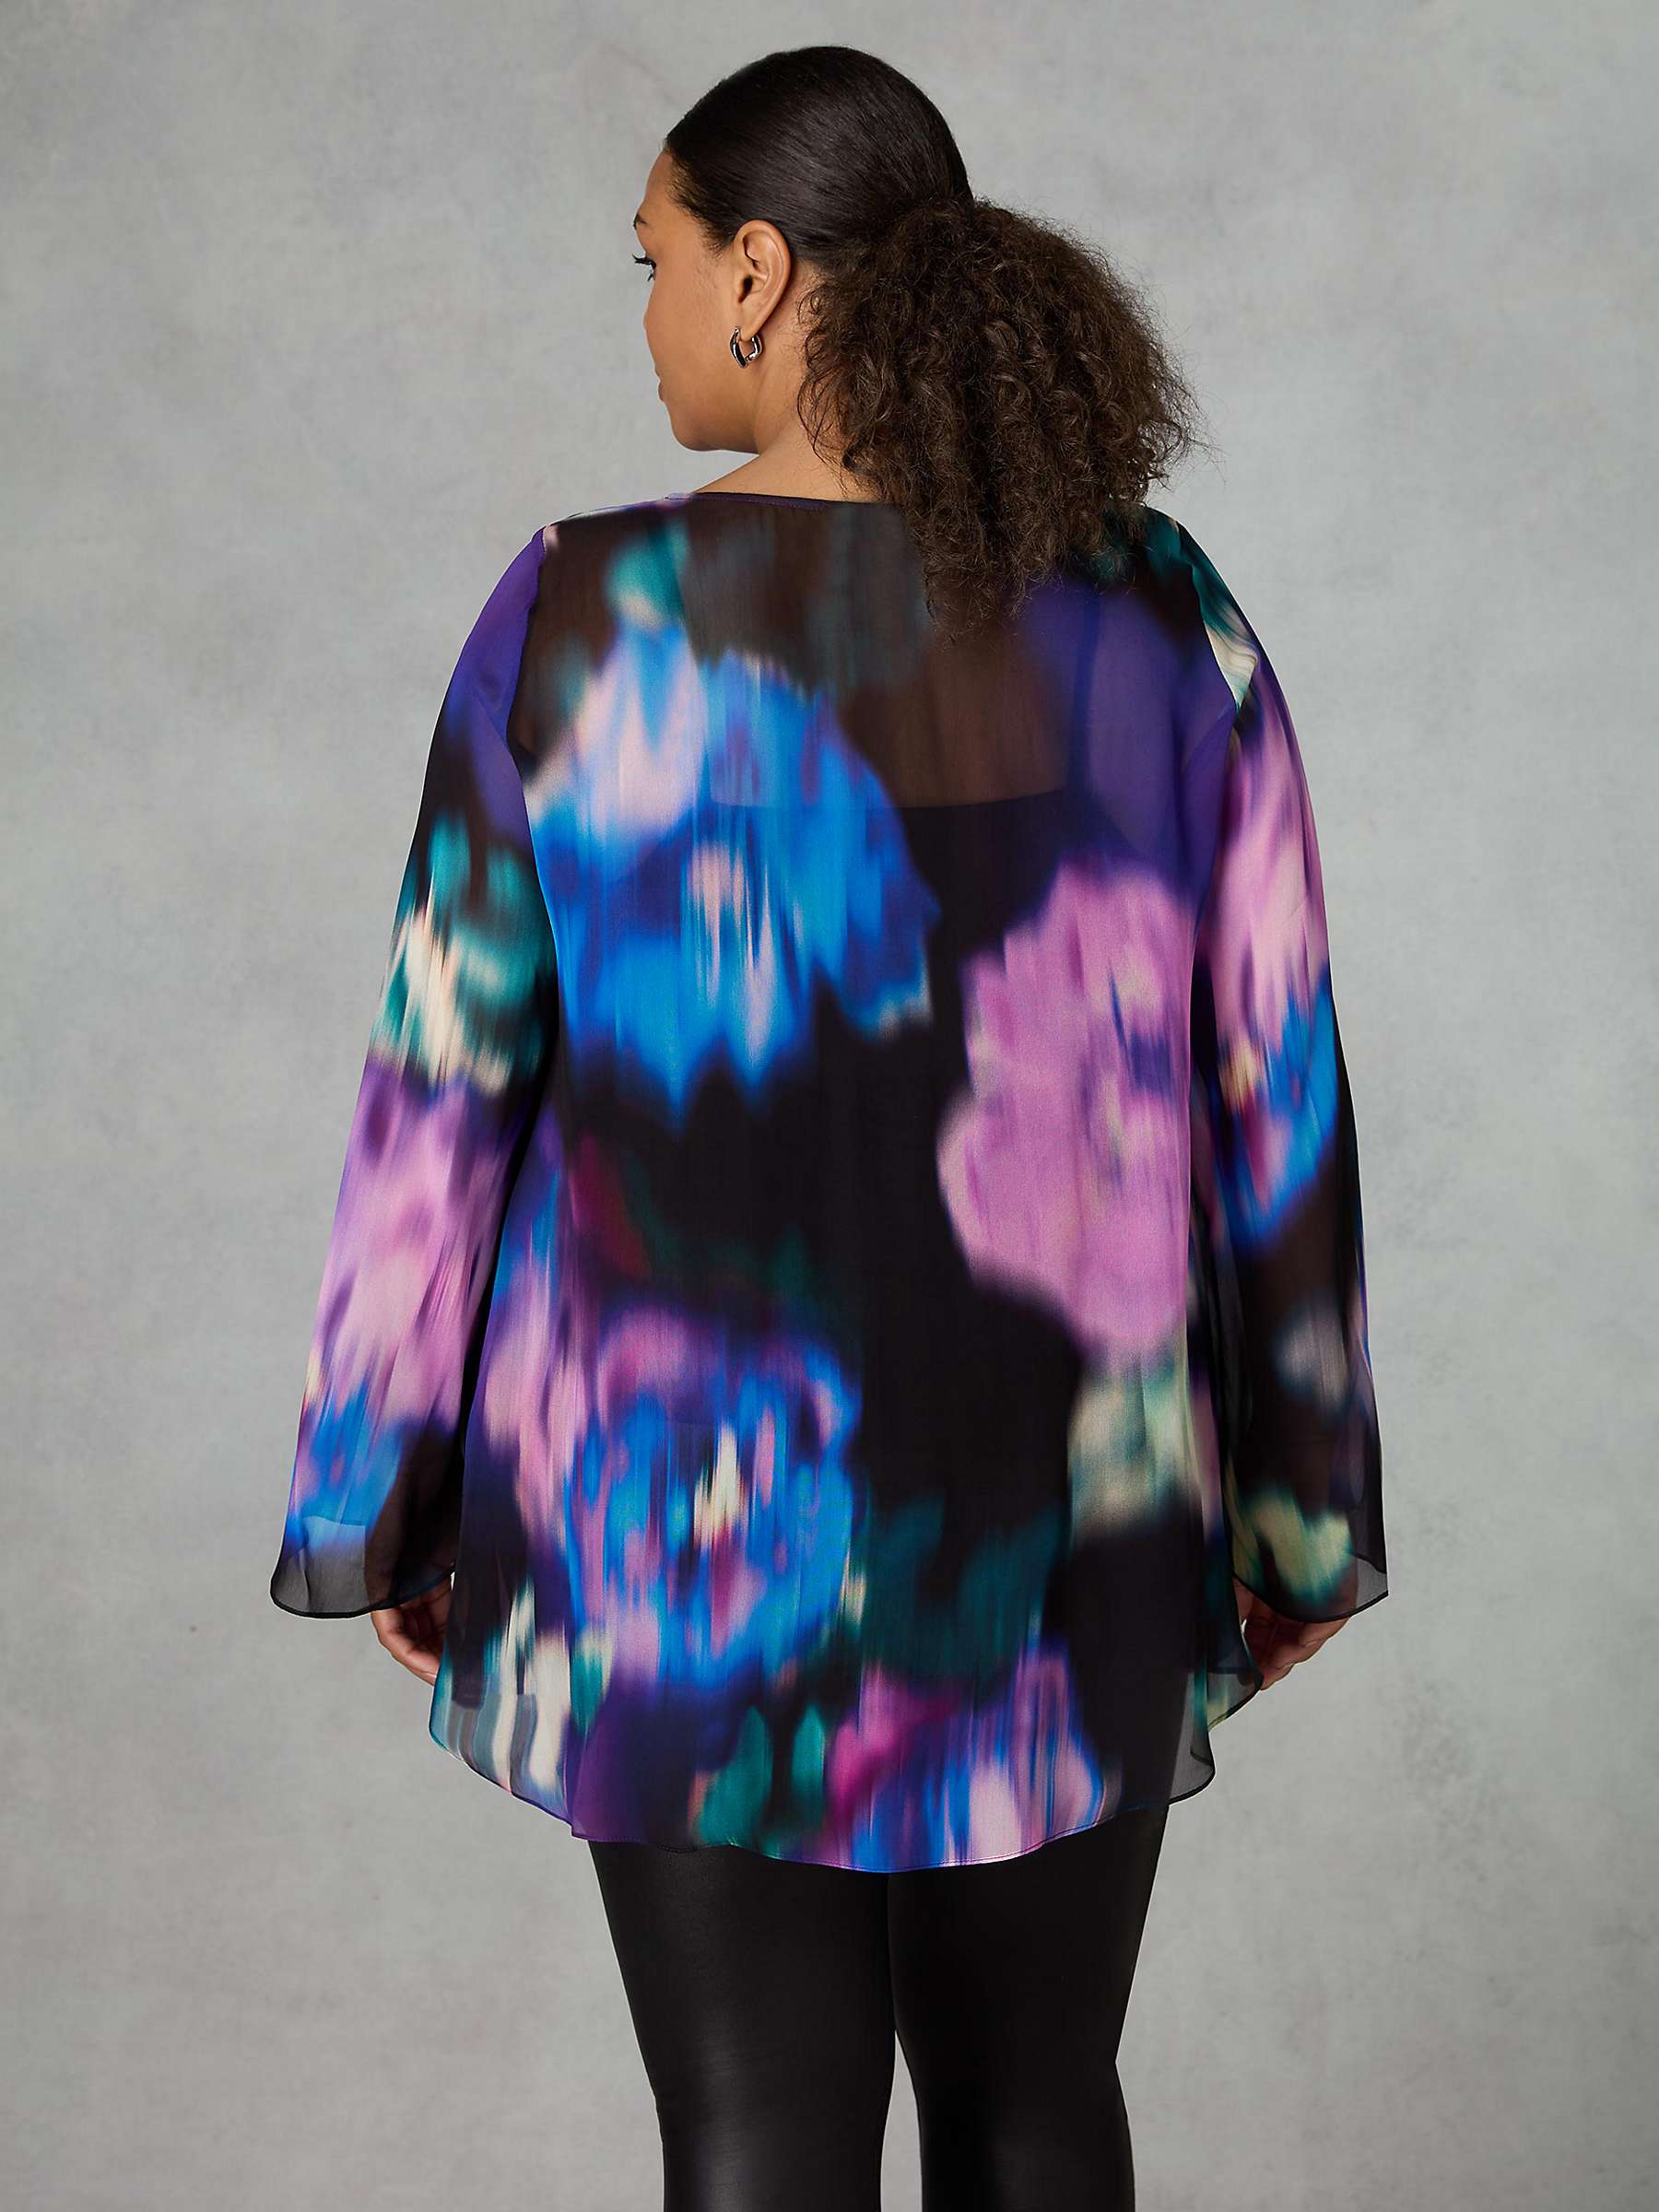 Buy Live Unlimited Curve Abstract Floral Print Chiffon High Low Top, Black/Multi Online at johnlewis.com